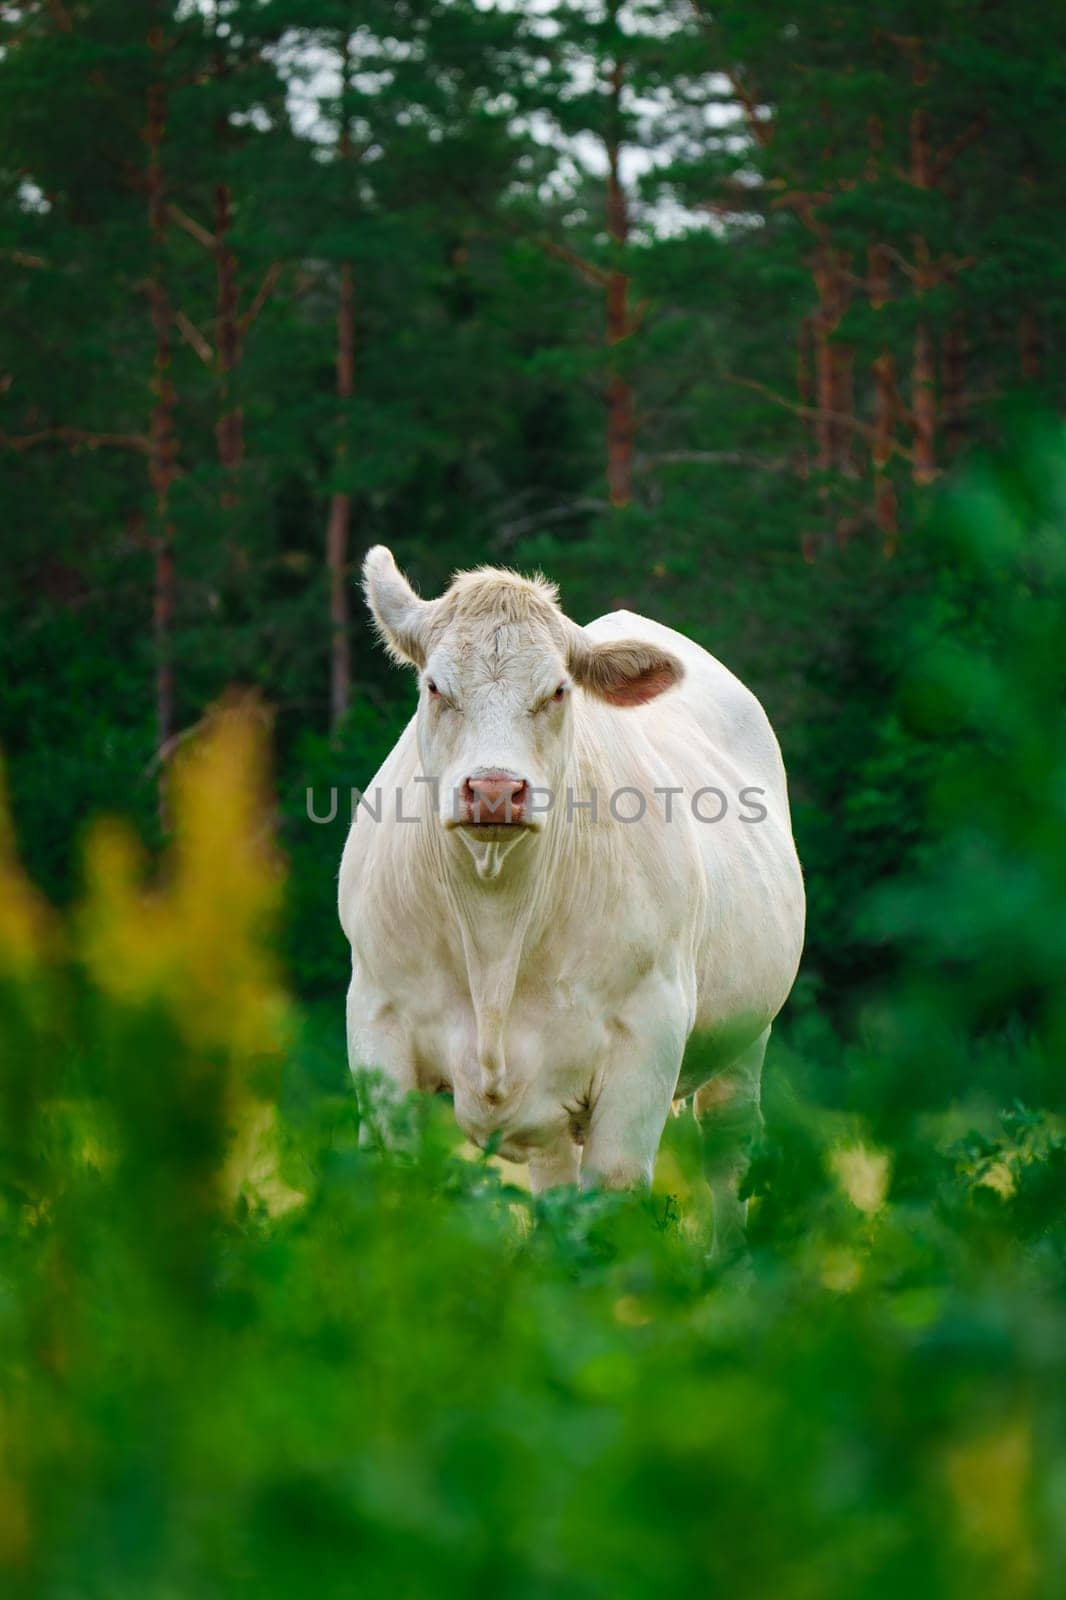 Captivating Charolais cattle grazing. Majestic French Charolais cows gracefully roaming in a picturesque meadow on a sunny day.